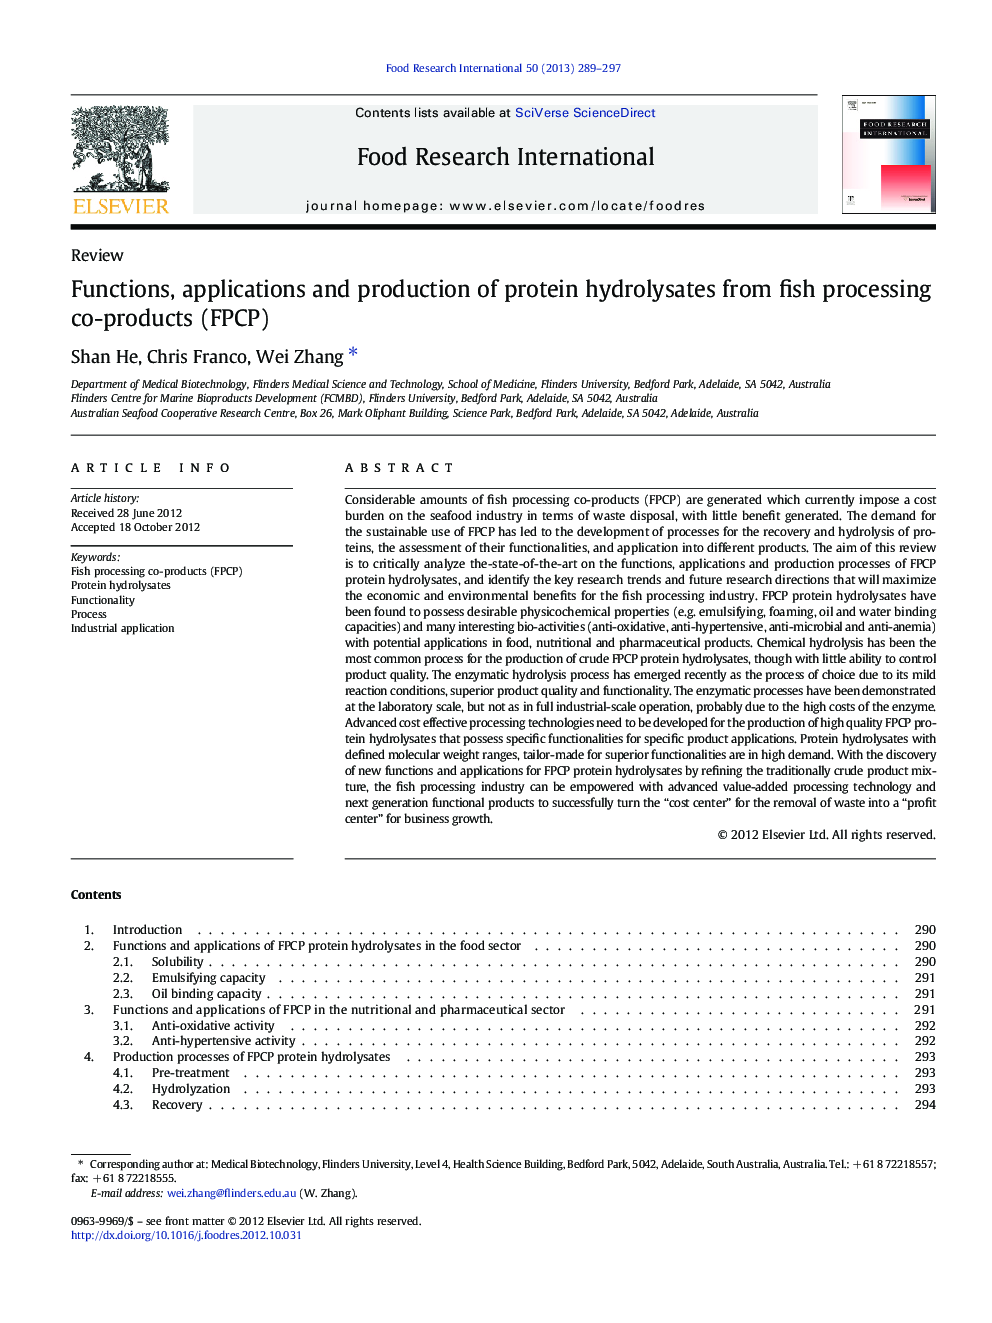 ReviewFunctions, applications and production of protein hydrolysates from fish processing co-products (FPCP)